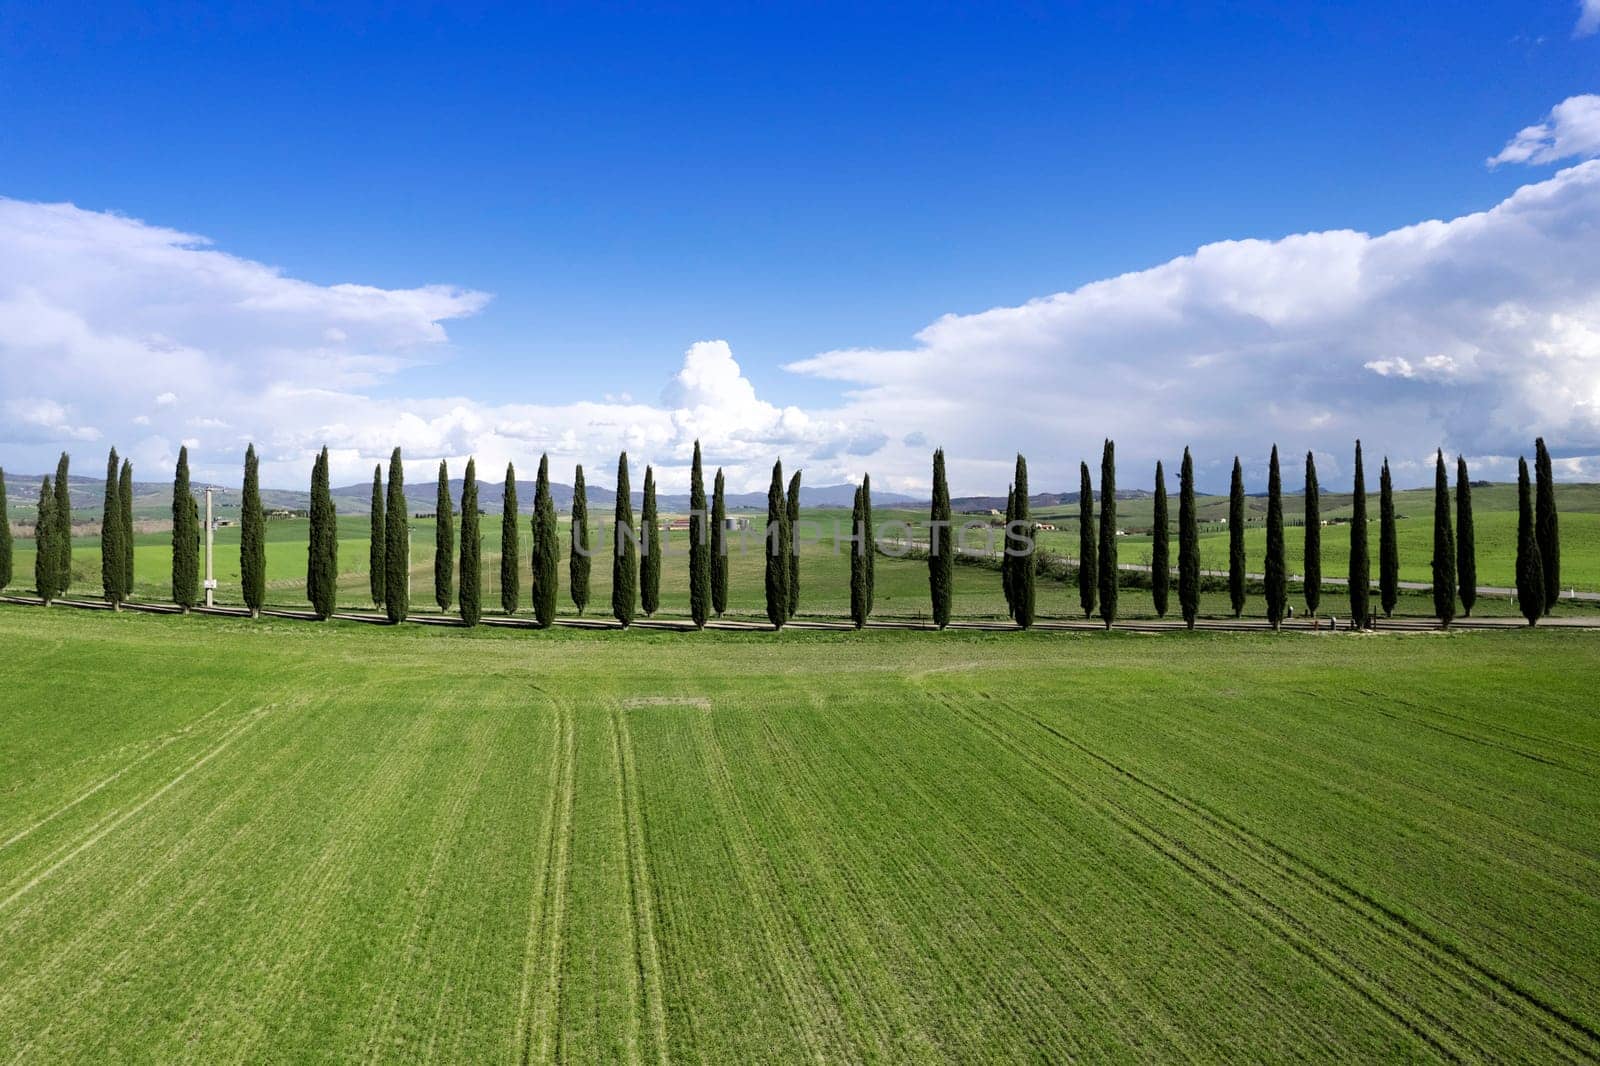 Photographic documentation of the cypresses of the province of Siena by fotografiche.eu